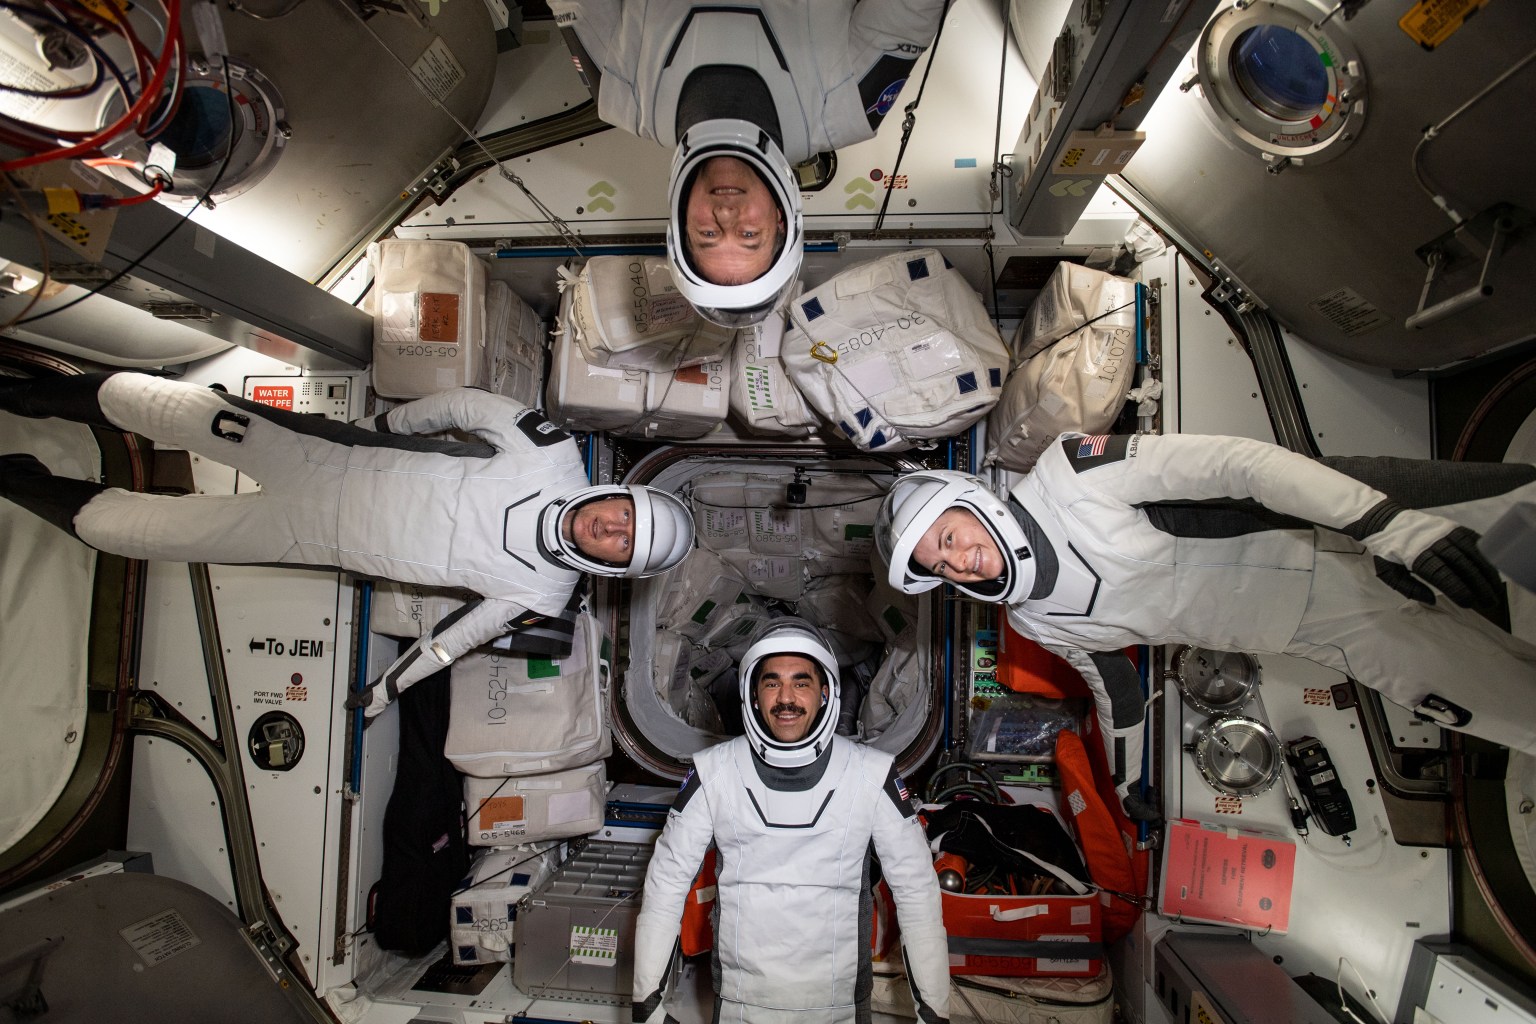 The four commercial crew astronauts representing the SpaceX Crew-3 mission are pictured in their Dragon spacesuits for a fit check aboard the International Space Station's Harmony module. Clockwise from bottom, are NASA astronaut Raja Chari; ESA (European Space Agency) astronaut Matthias Maurer; and NASA astronauts Tom Marshburn and Kayla Barron.